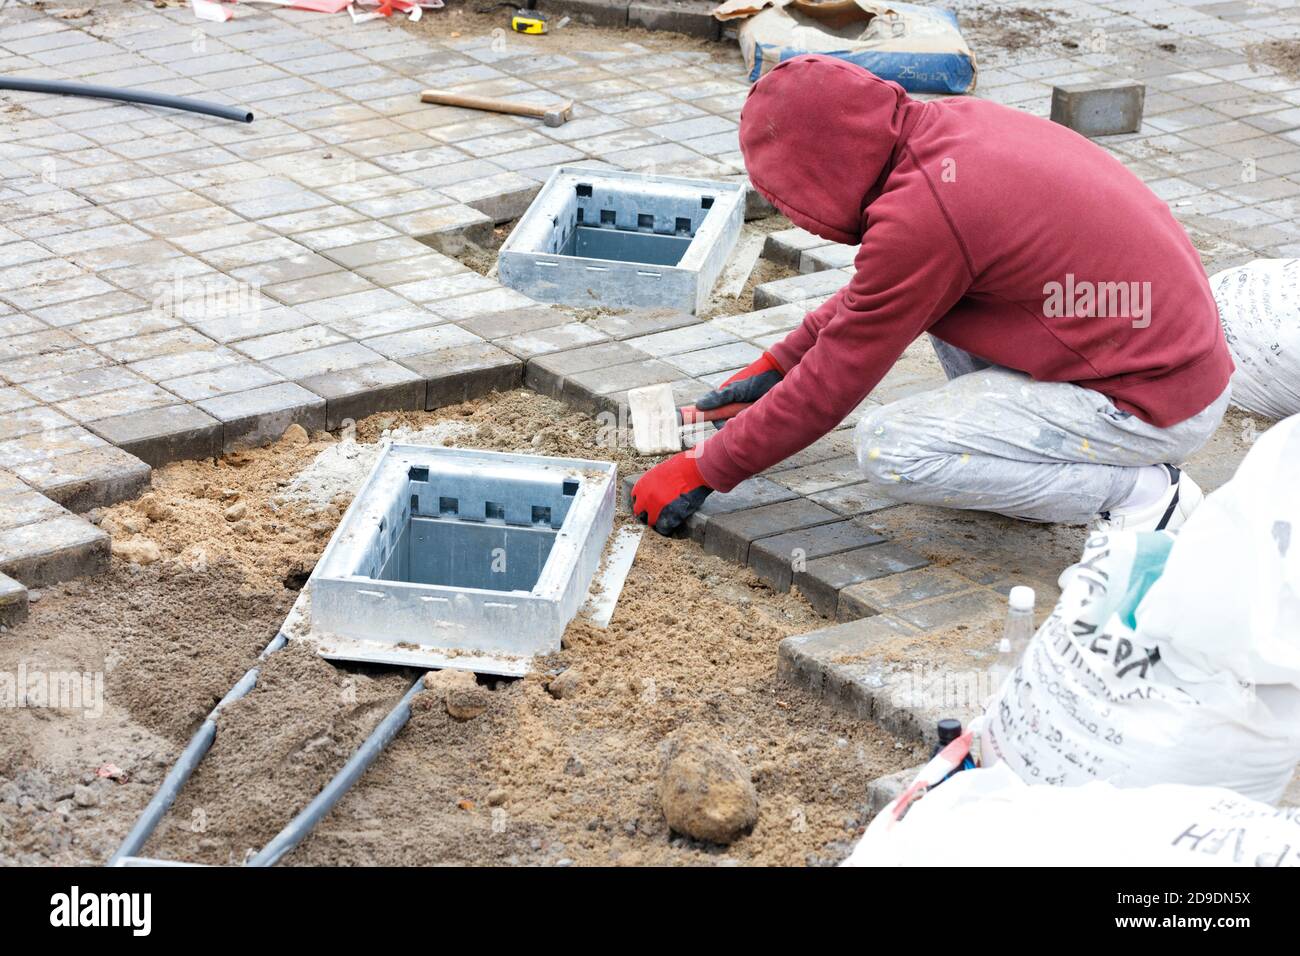 A worker installs engineering hatch shafts and lays paving slabs on prepared flat sandy soil on the sidewalk, copy space. Stock Photo